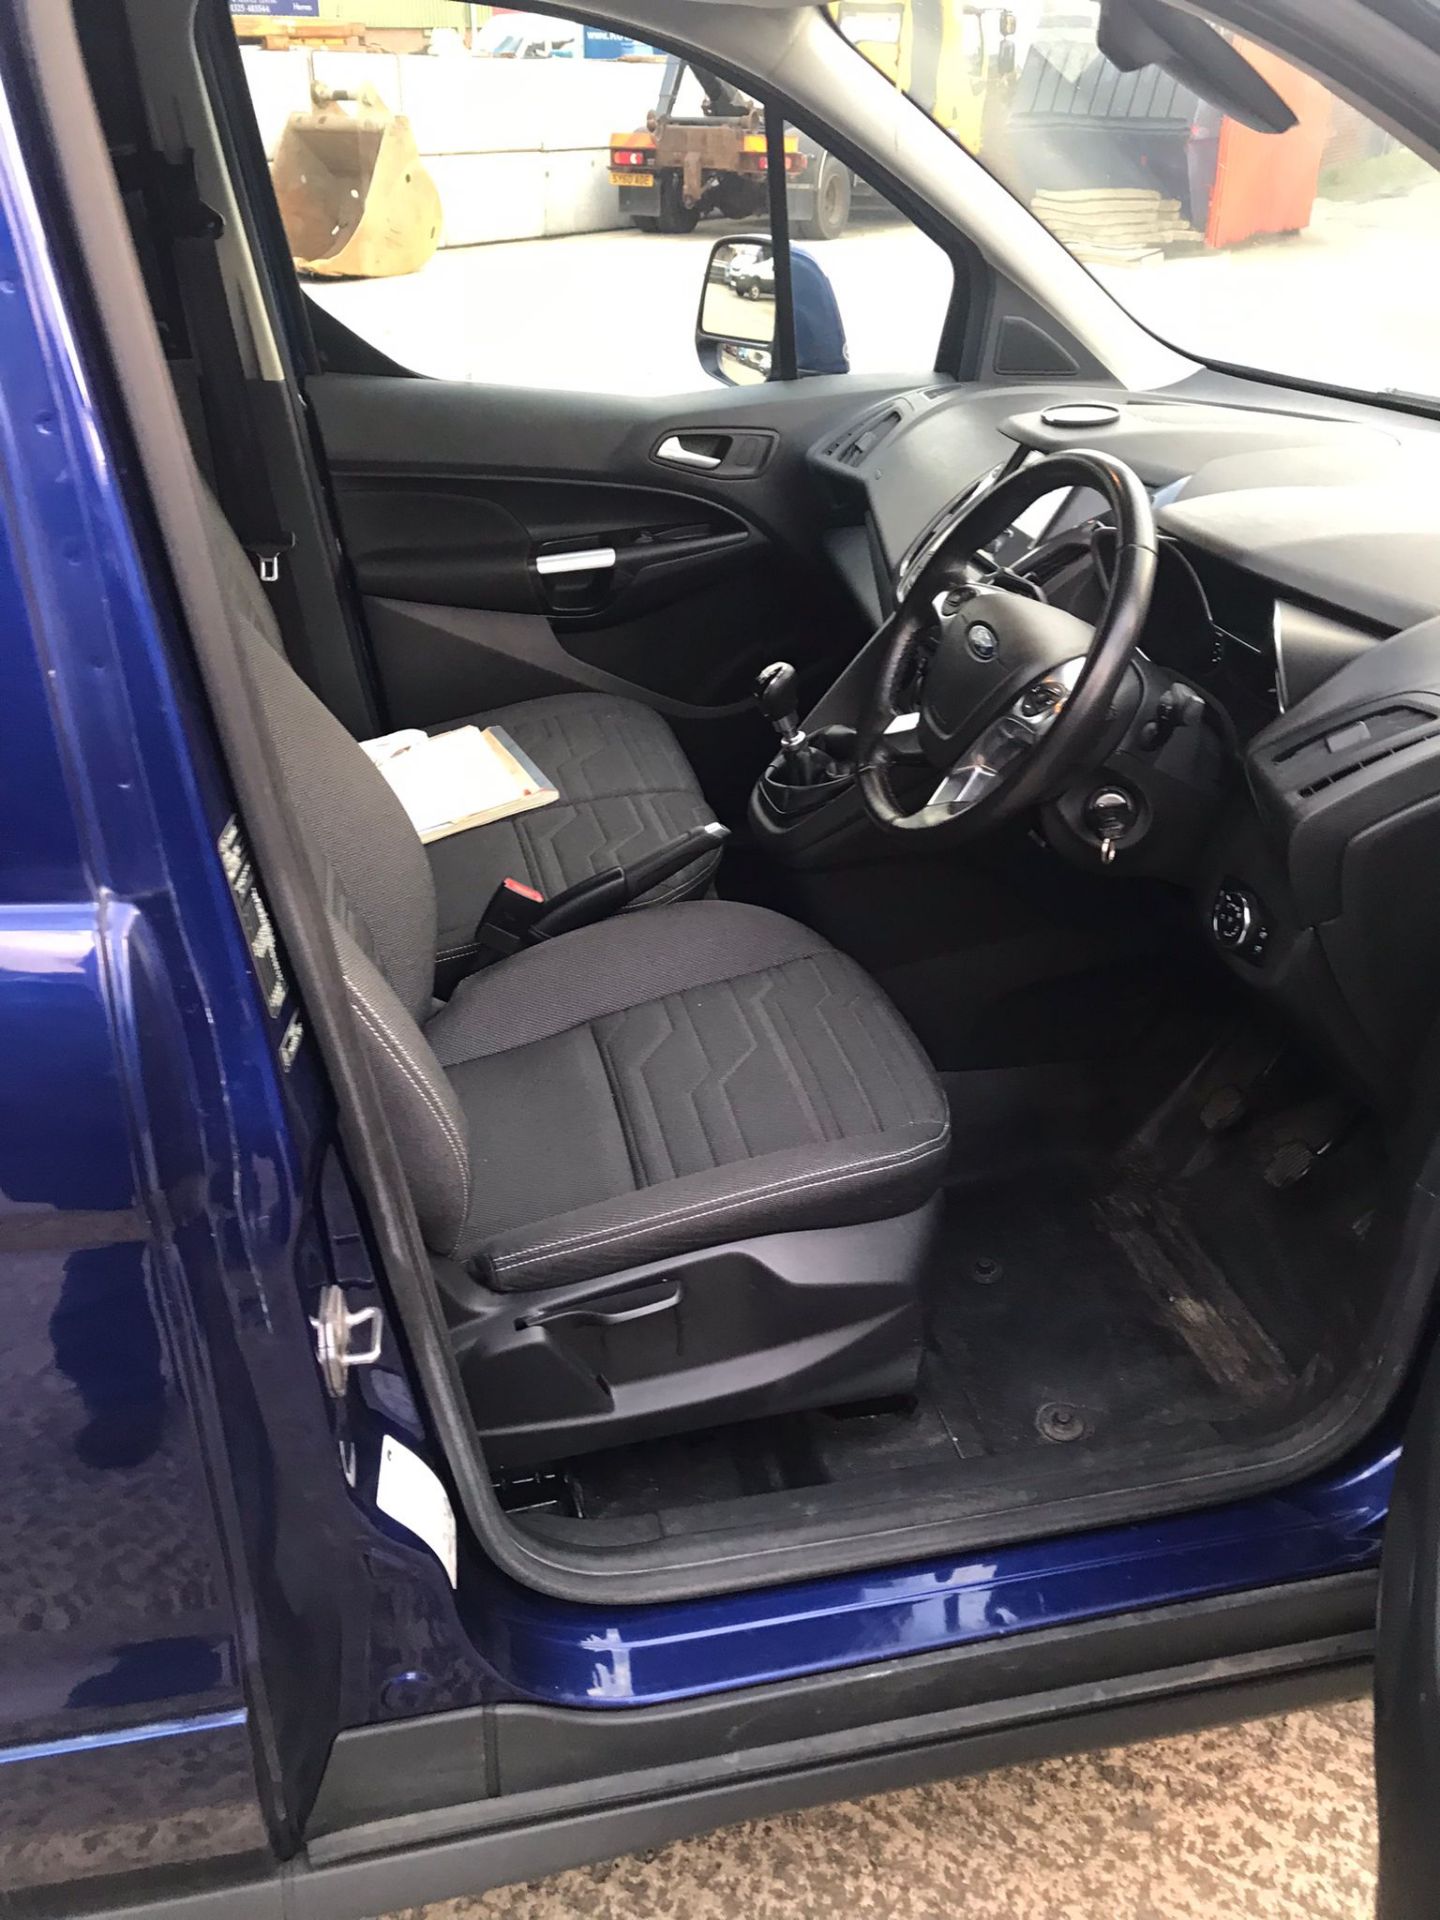 2018 ford transit connect - Image 18 of 20